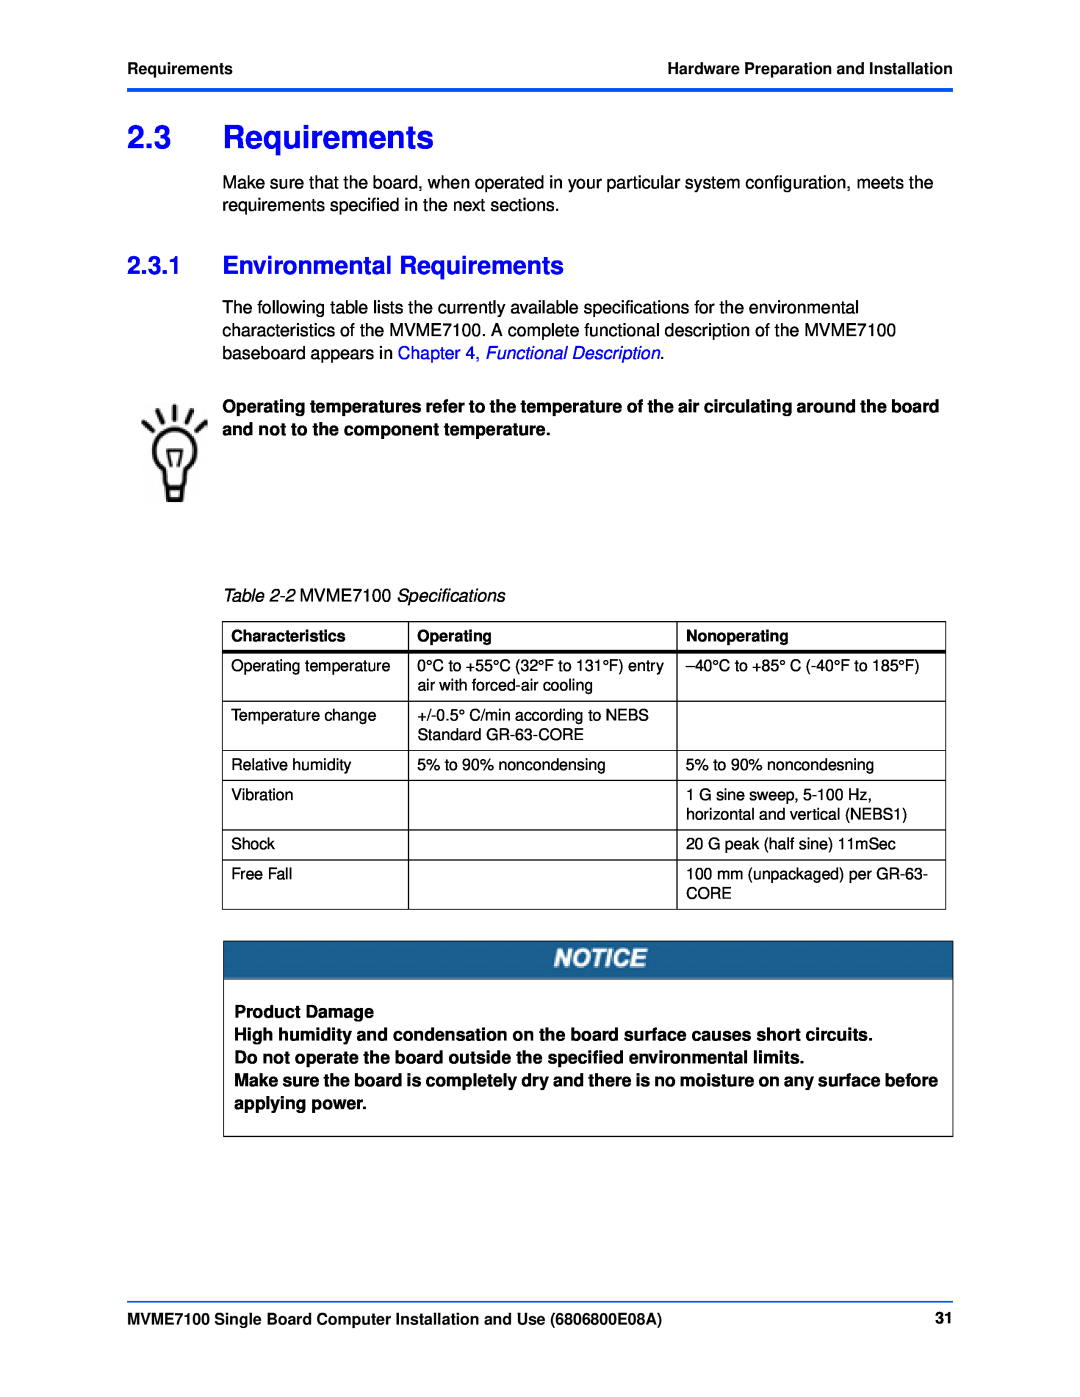 Emerson manual Environmental Requirements, 2 MVME7100 Specifications 